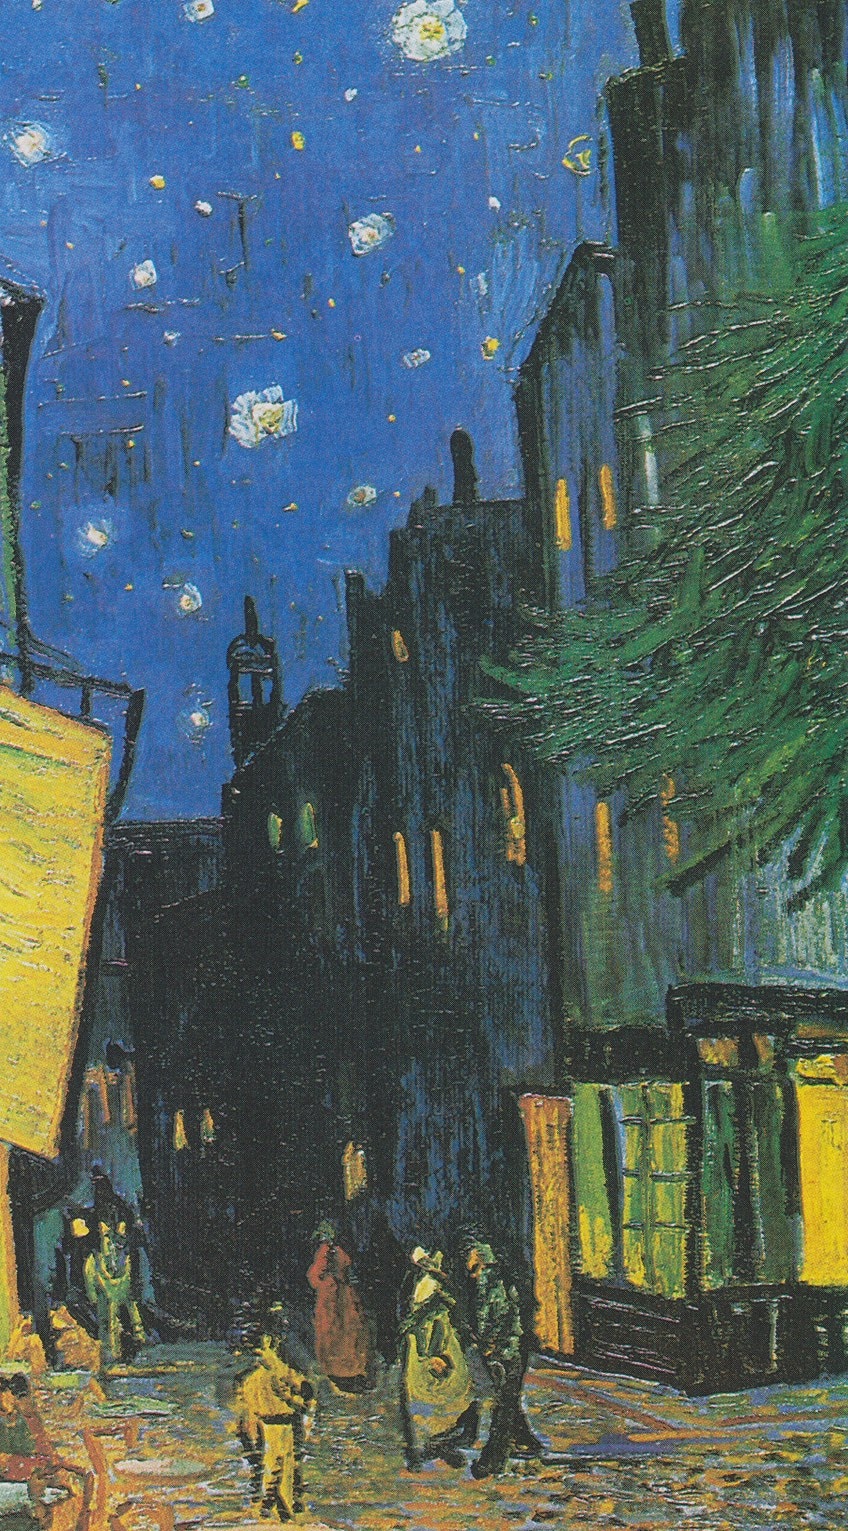 Detail of the Terrace at Night Painting